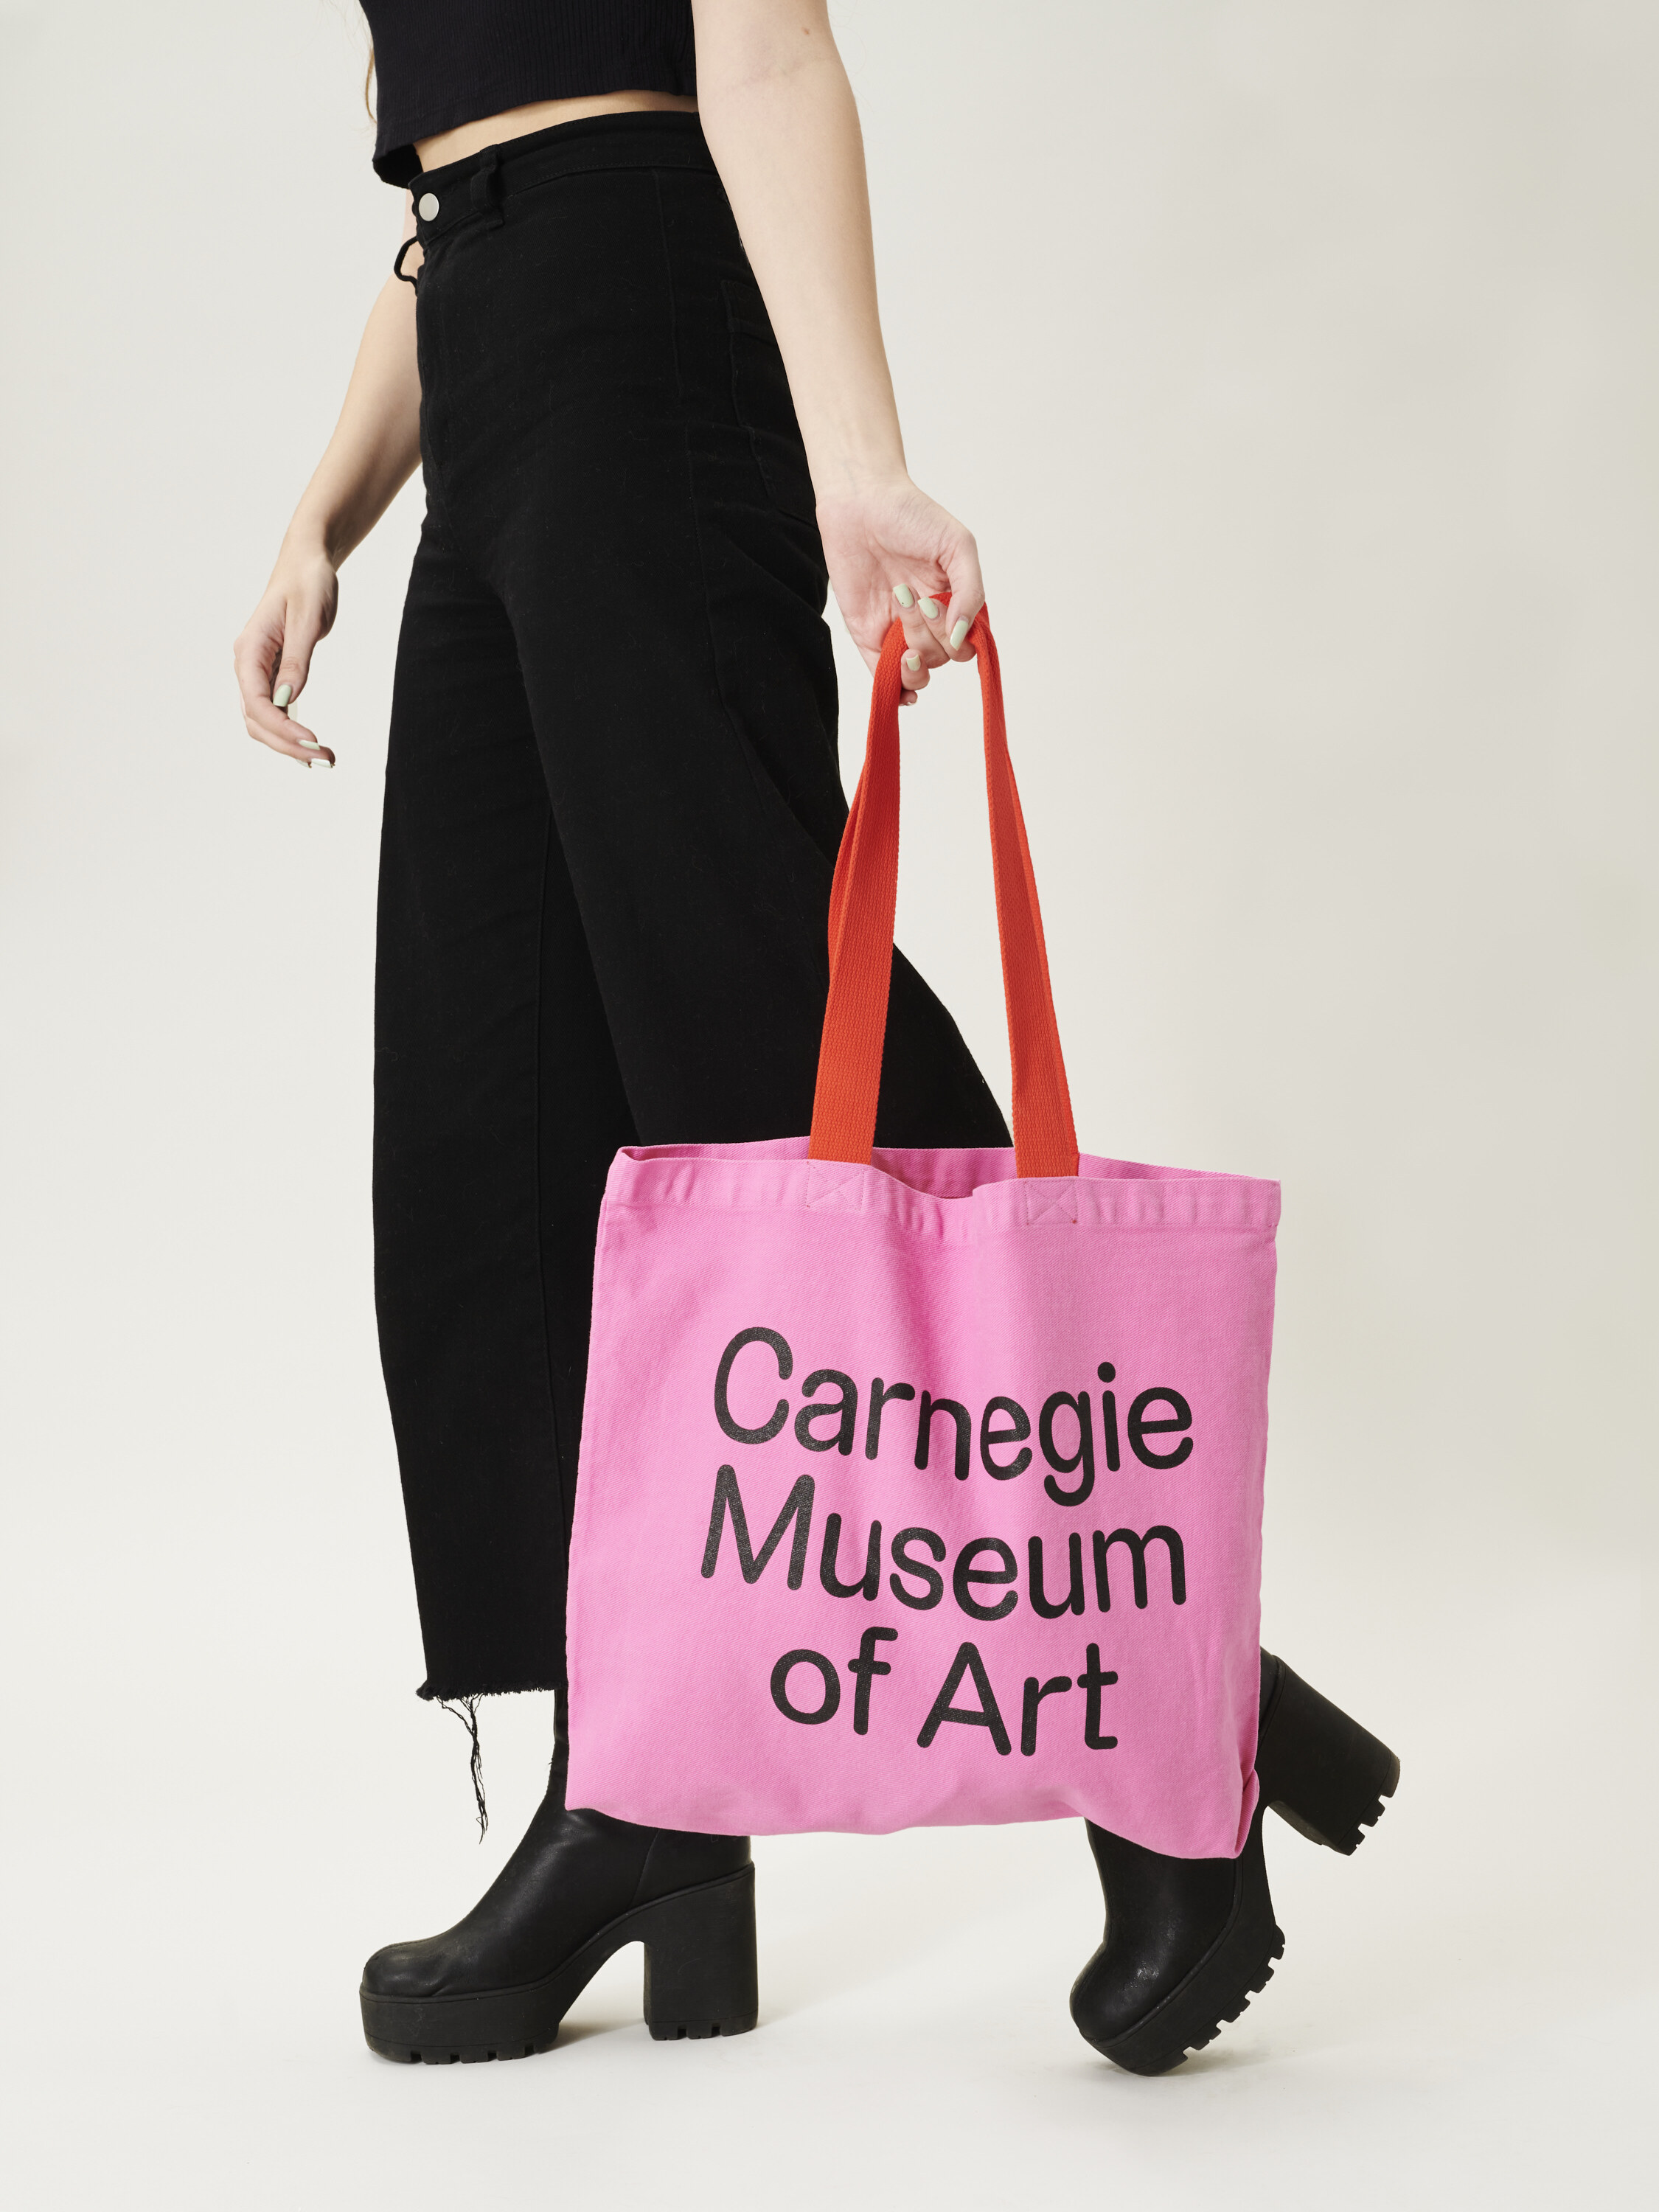 person holding the new Carnegie museum of art tote bag featuring the carnegie soft font